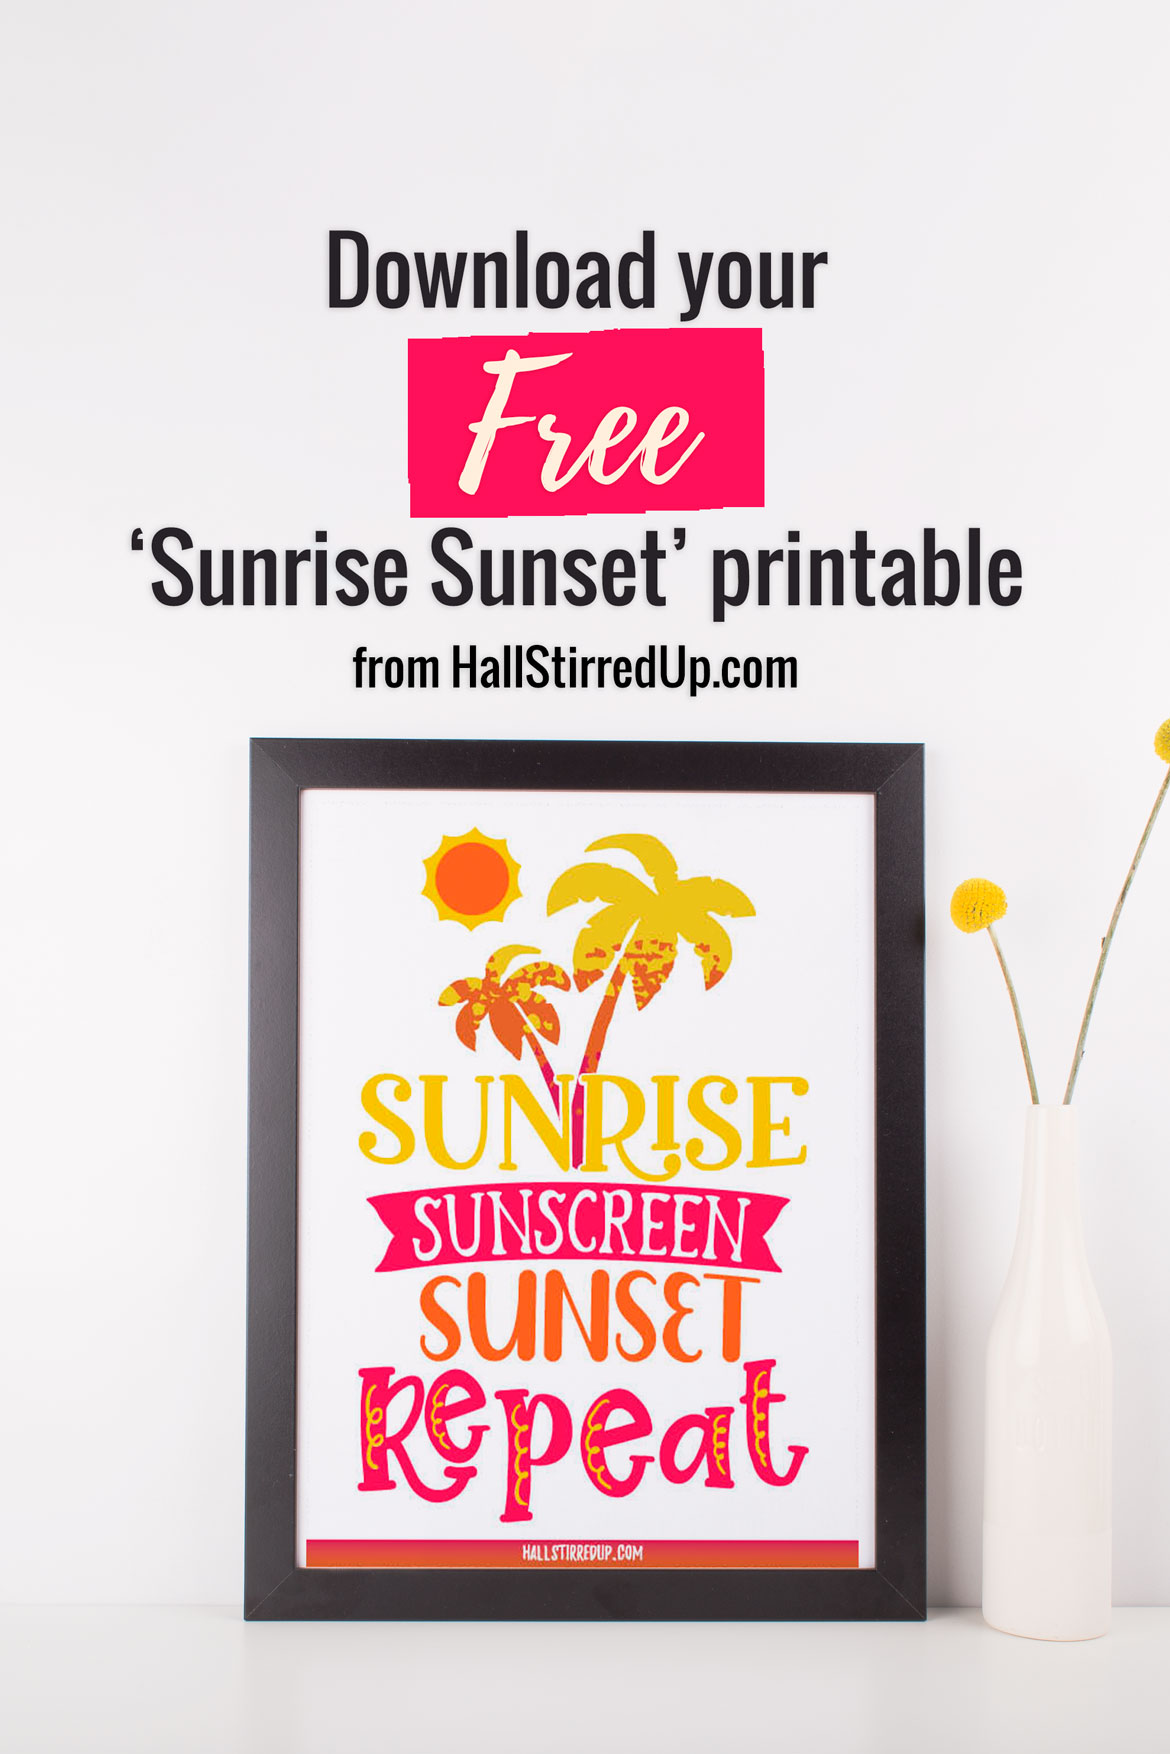 Sunrise and sunset on repeat Includes fun printable